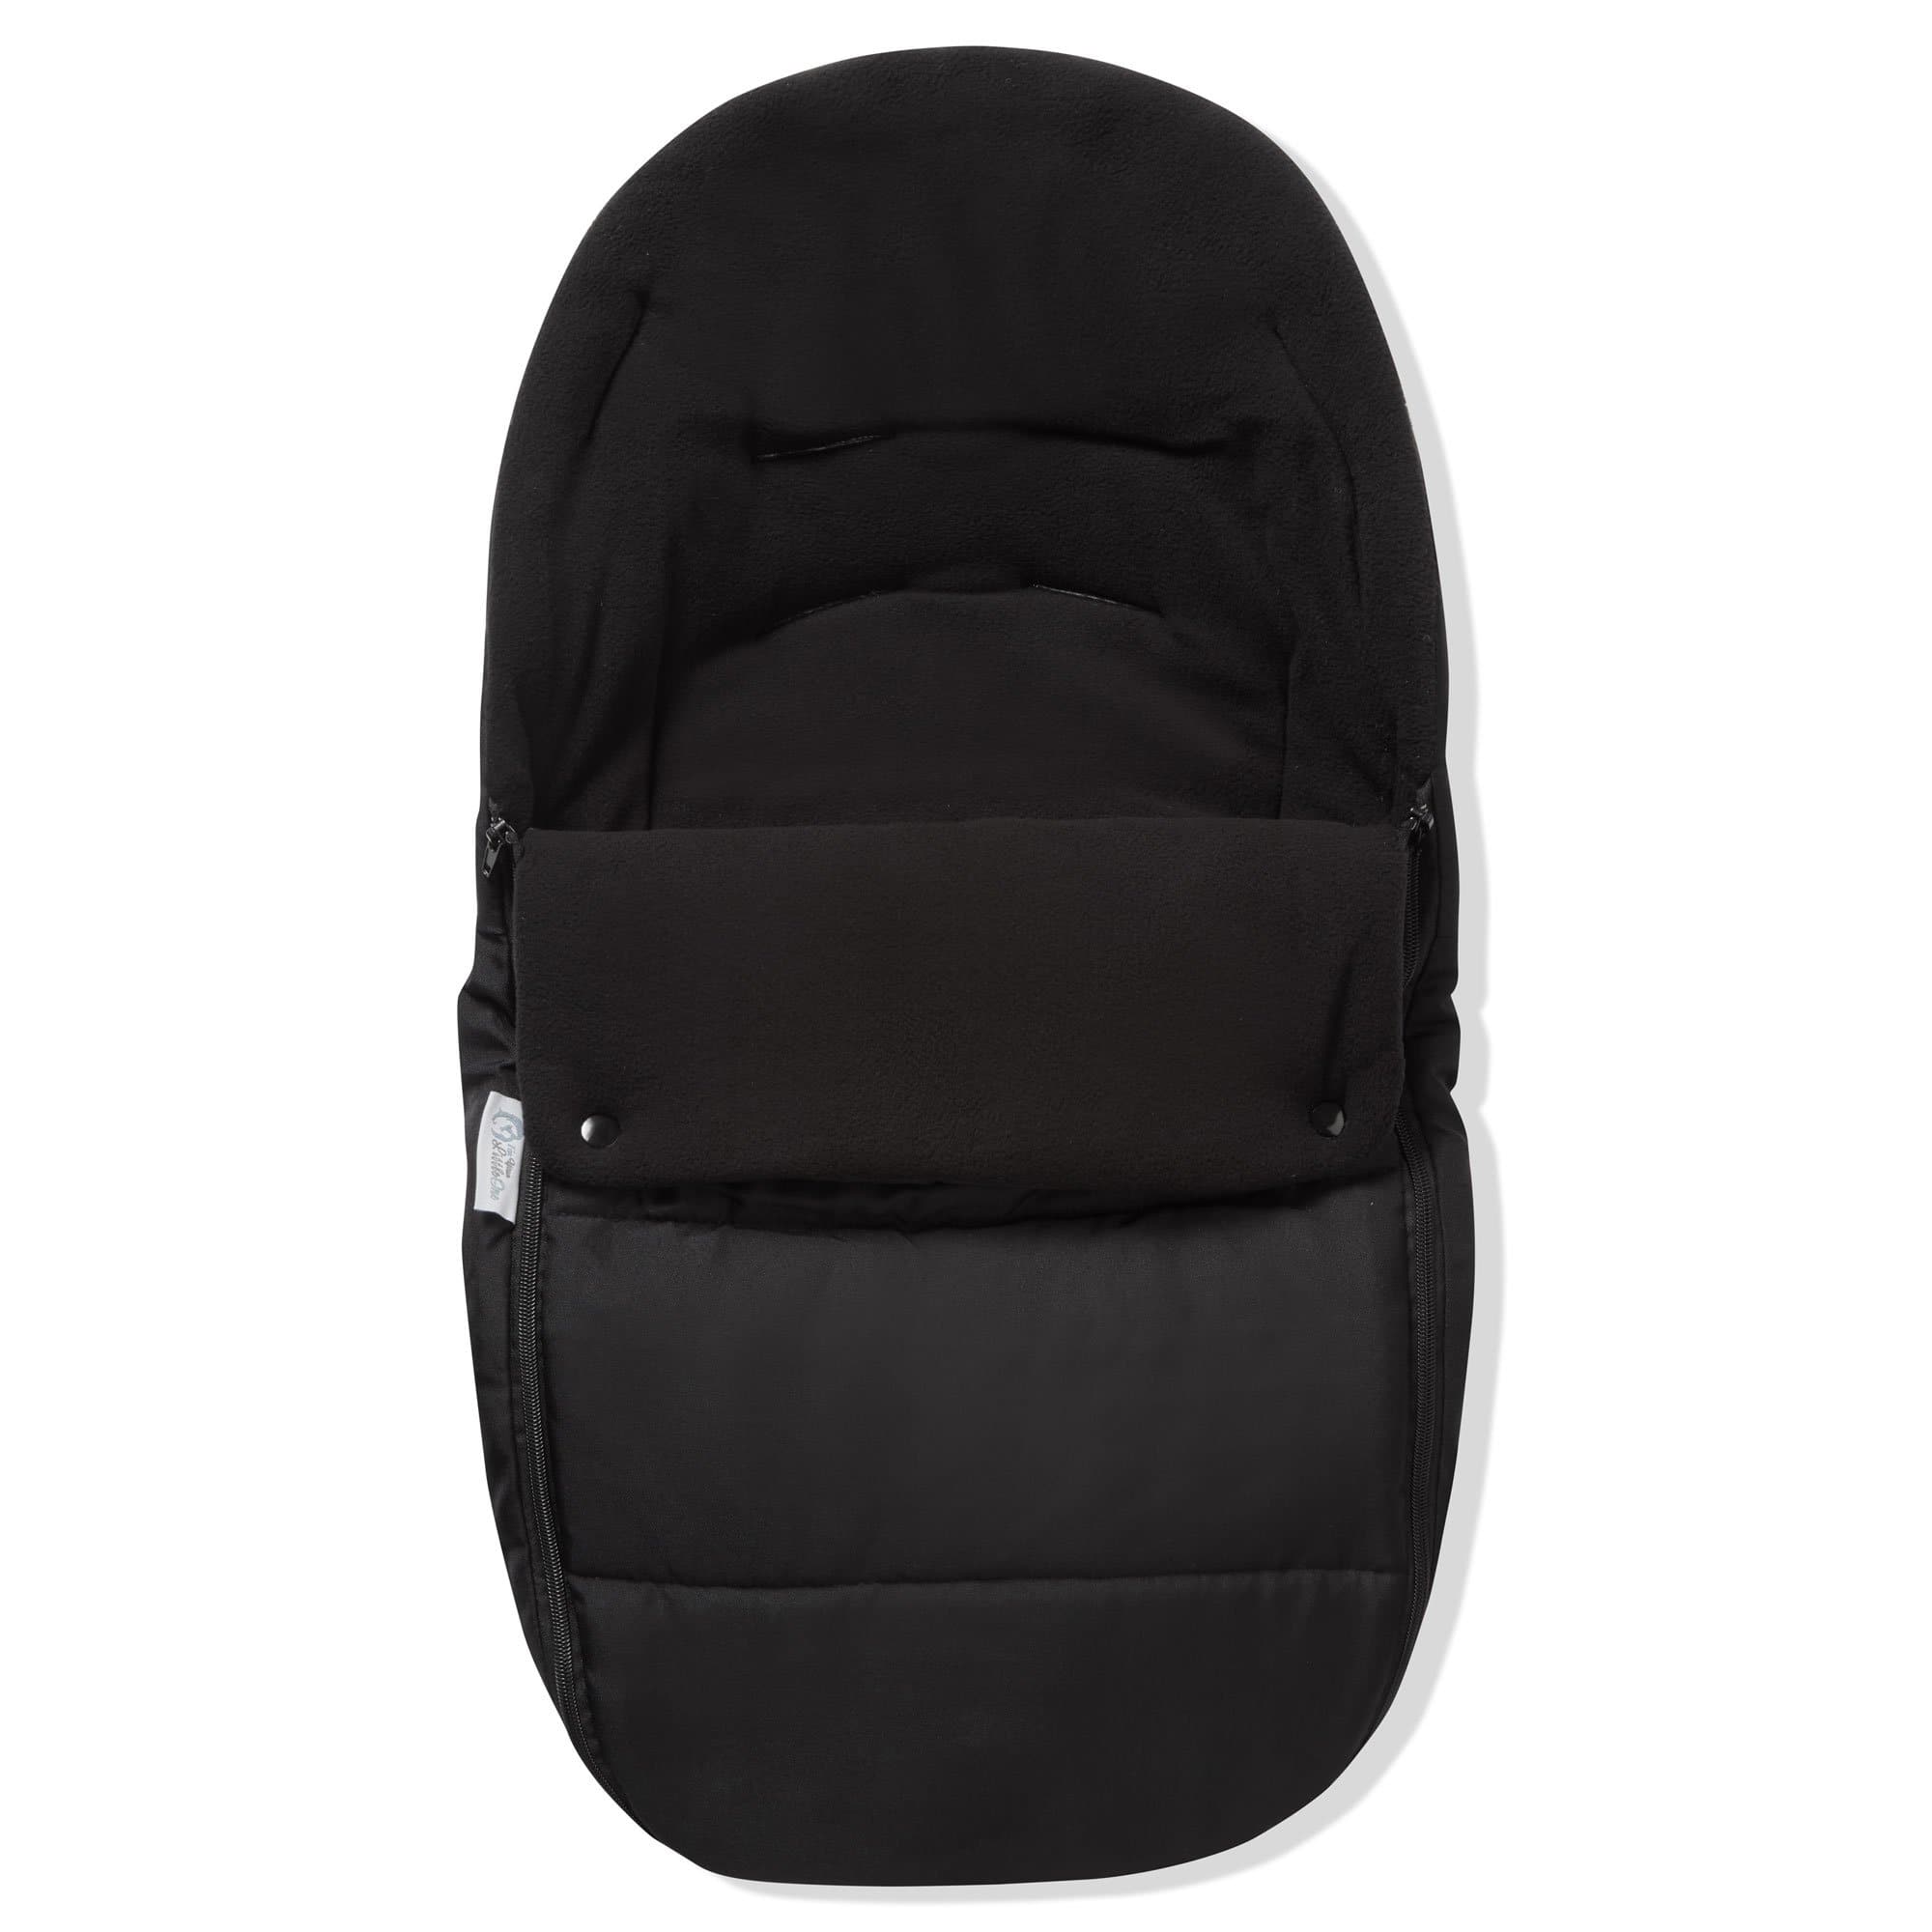 Universal Premium Car Seat Footmuff / Cosy Toes - Black Jack / Fits All Models | For Your Little One